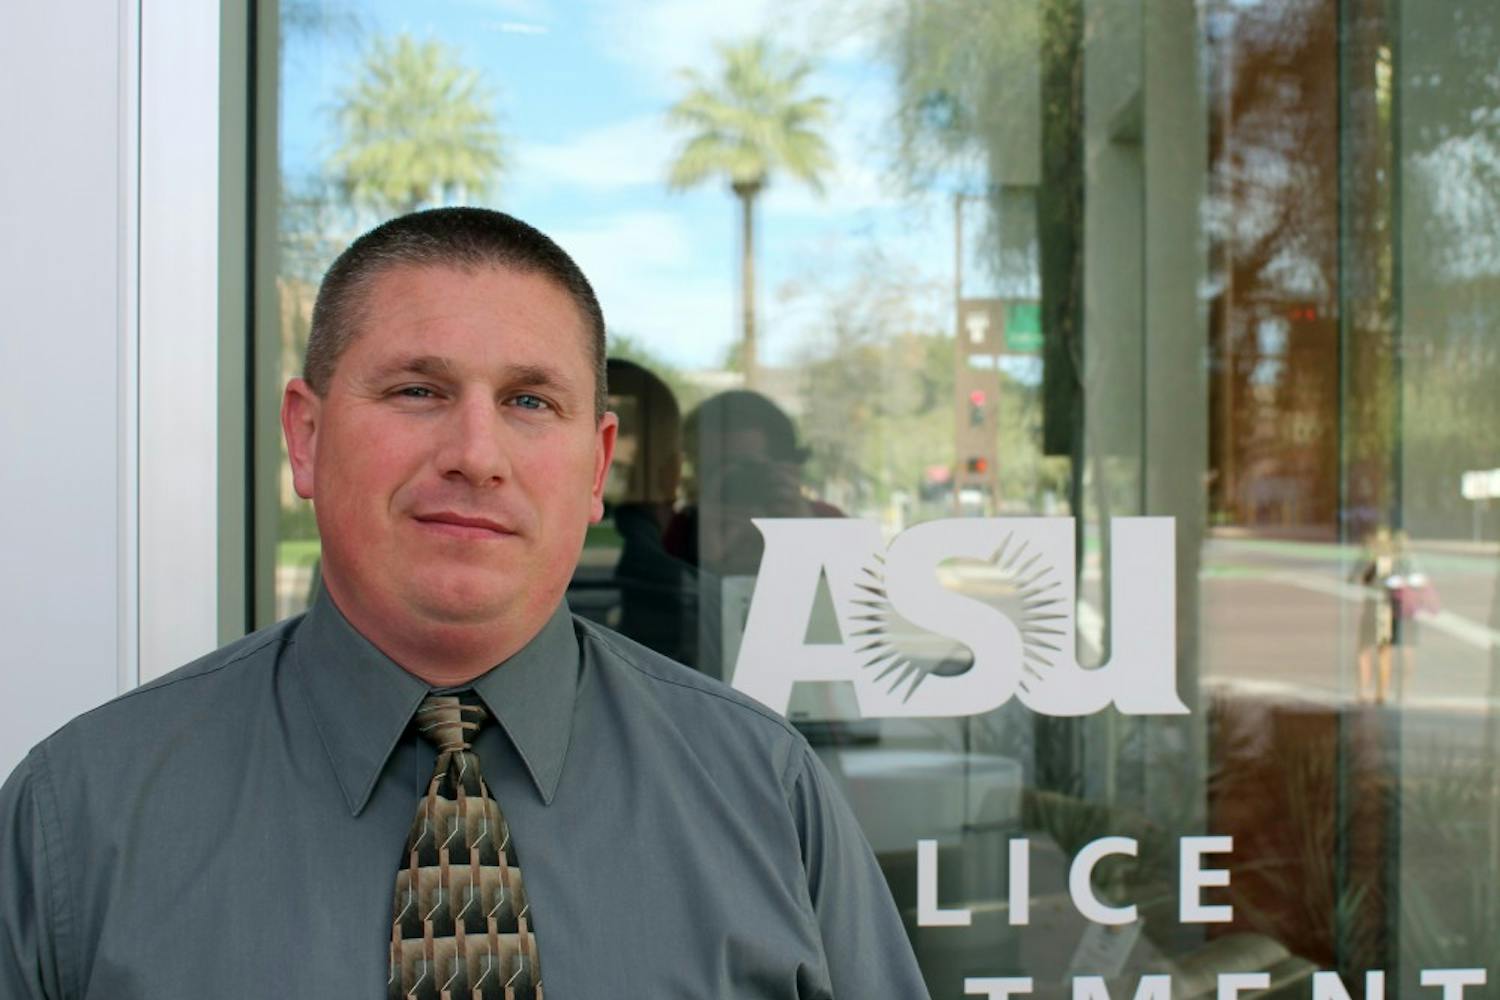 Commander John Thompson,&nbsp;who oversees Tempe campus patrol operations for the ASU PD, poses for a picture&nbsp;outside the ASU Police Department offices in Tempe, Arizona&nbsp;on Feb. 16, 2017